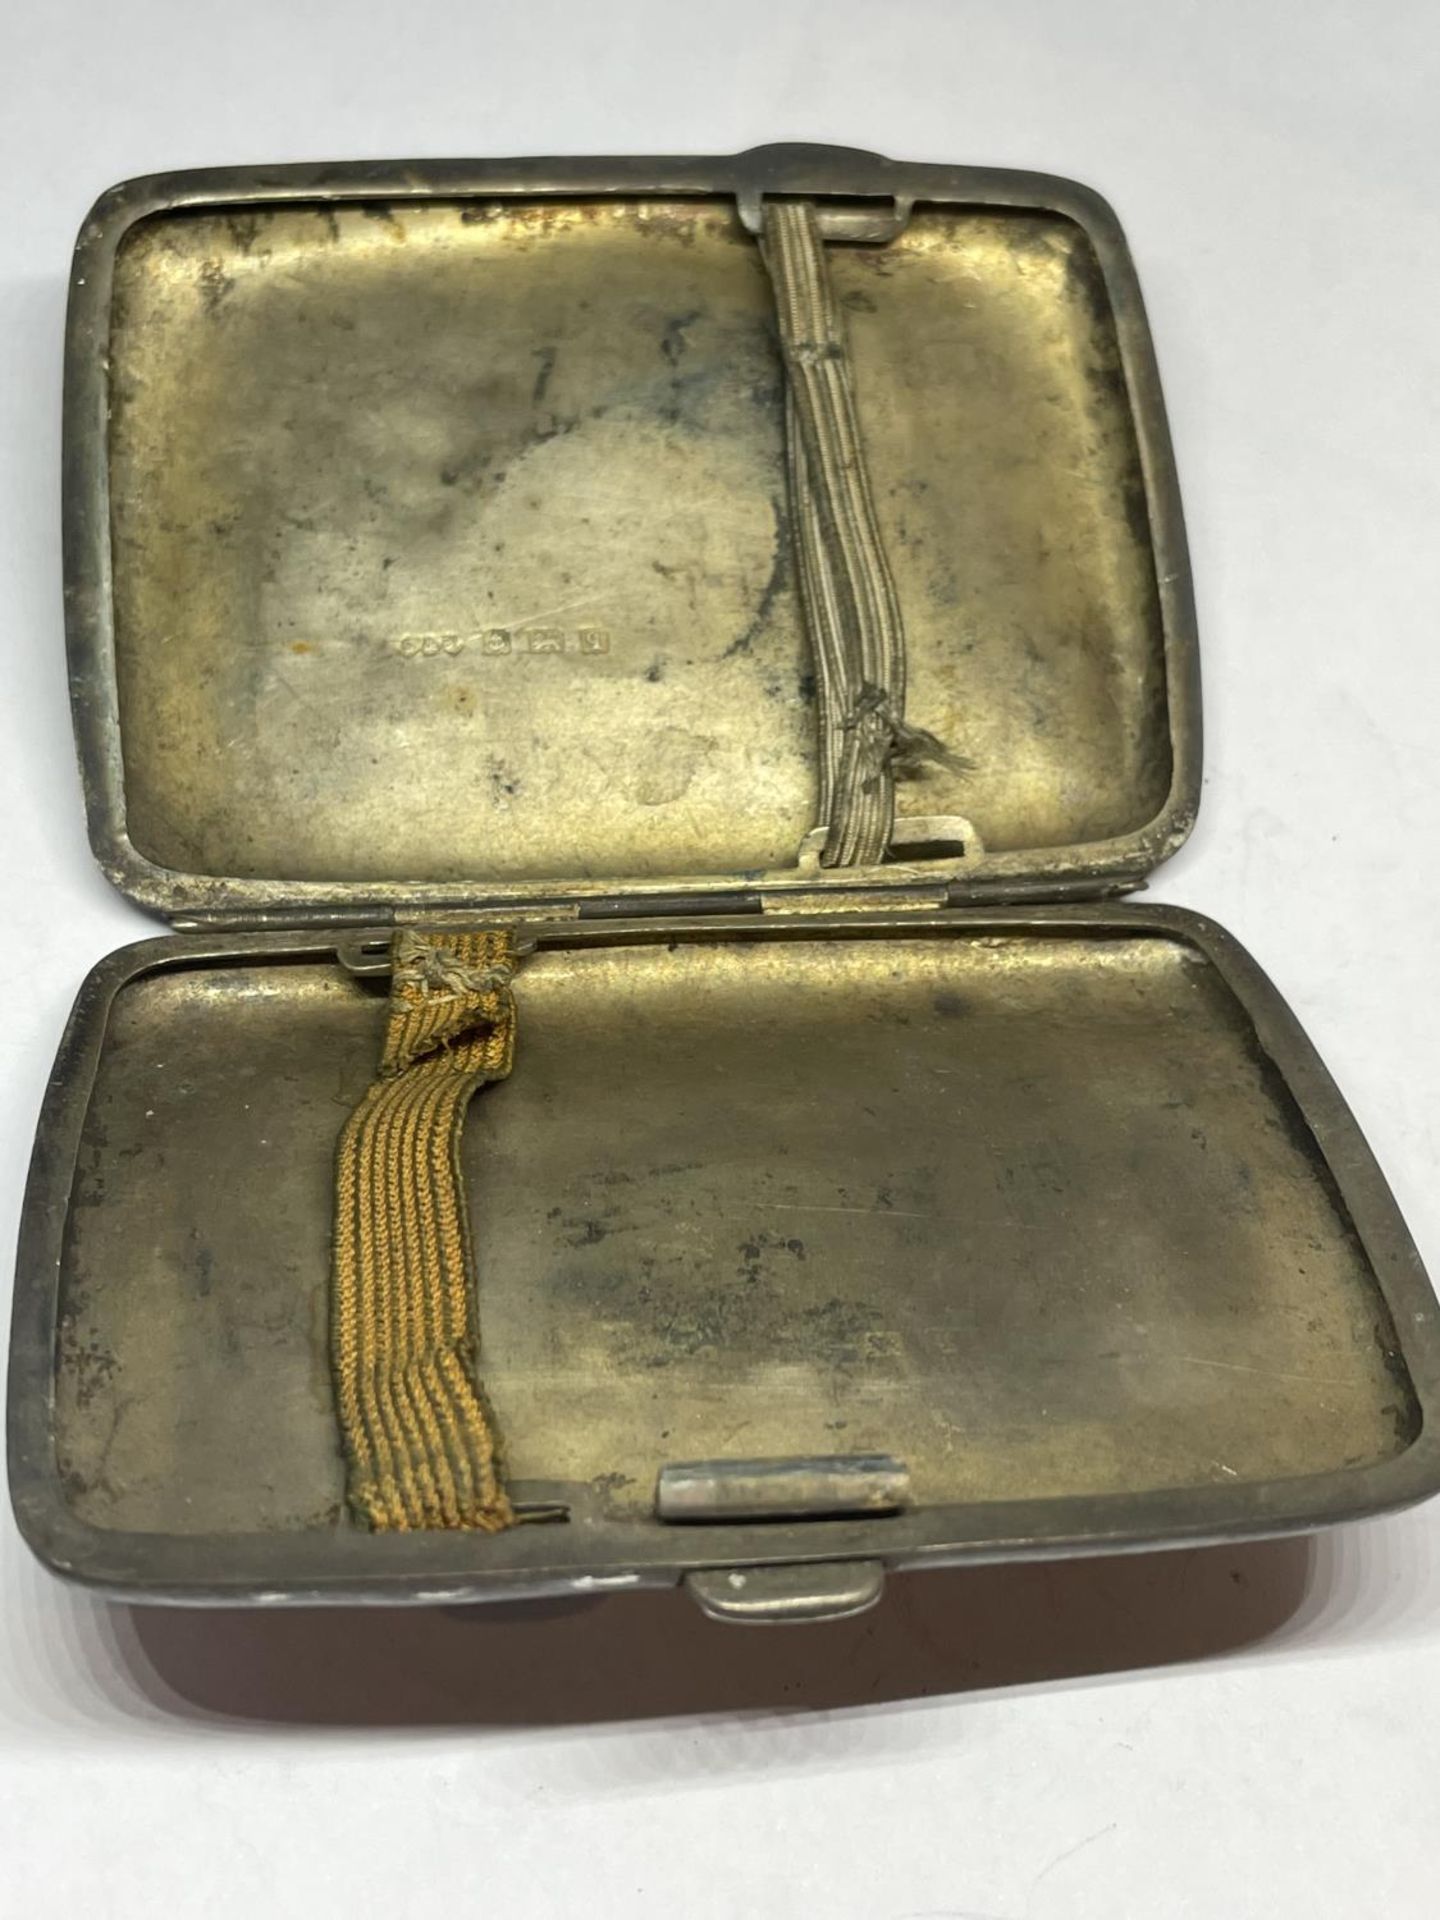 A HALLMARKED BIRMINGHAM SILVER CIGARETTE CASE GROSS WEIGHT 80.8 GRAMS - Image 3 of 4